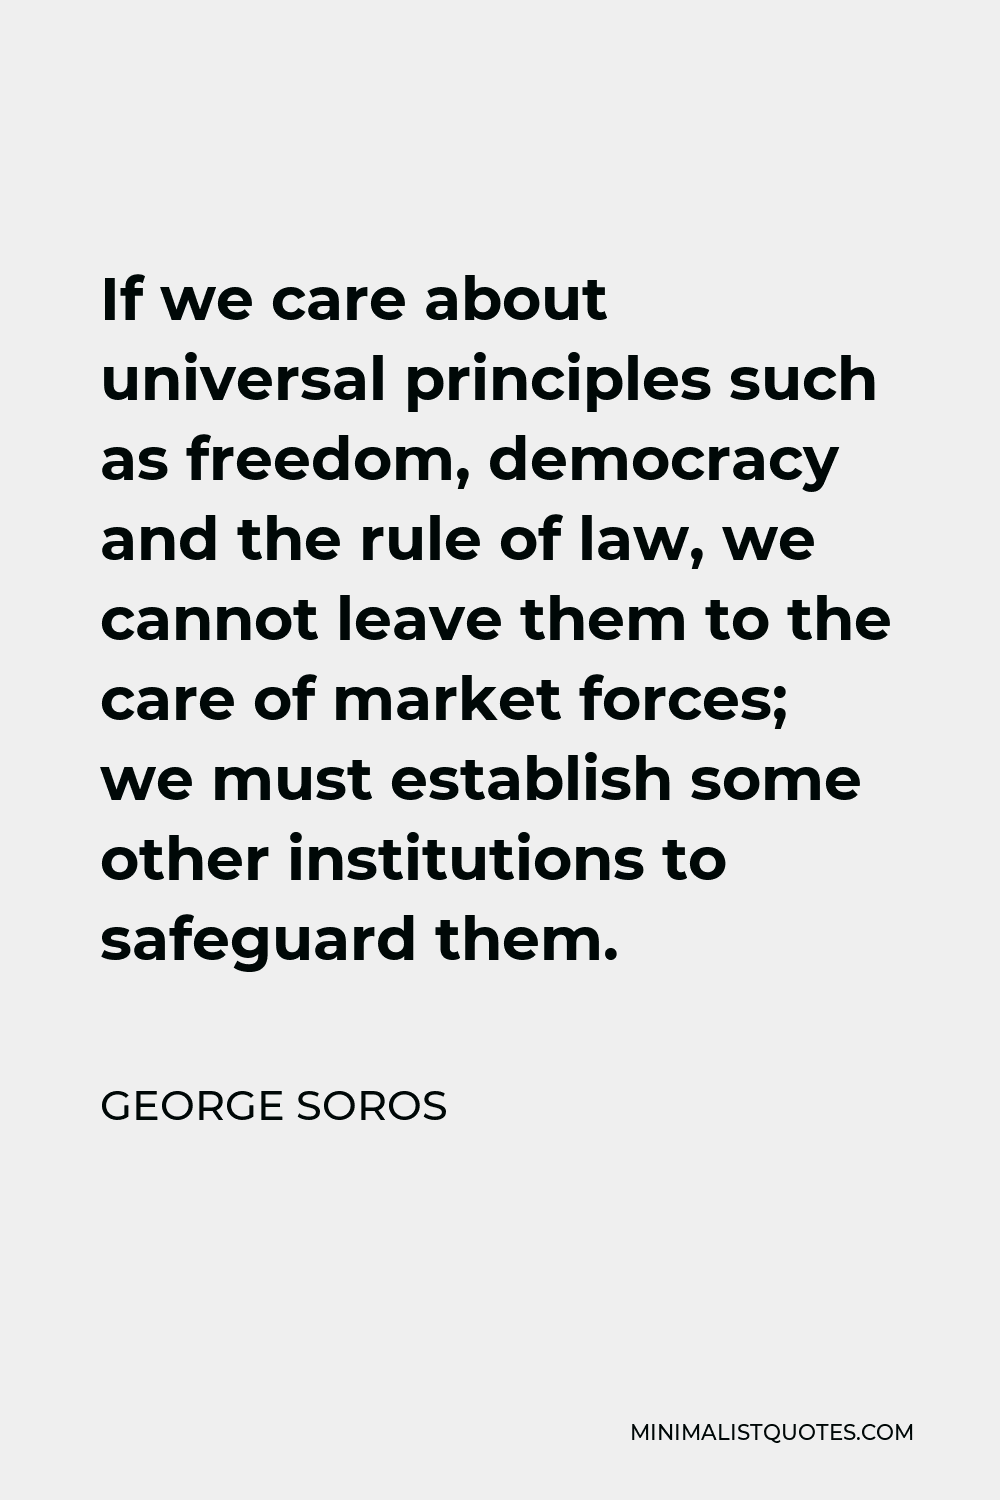 George Soros Quote - If we care about universal principles such as freedom, democracy and the rule of law, we cannot leave them to the care of market forces; we must establish some other institutions to safeguard them.